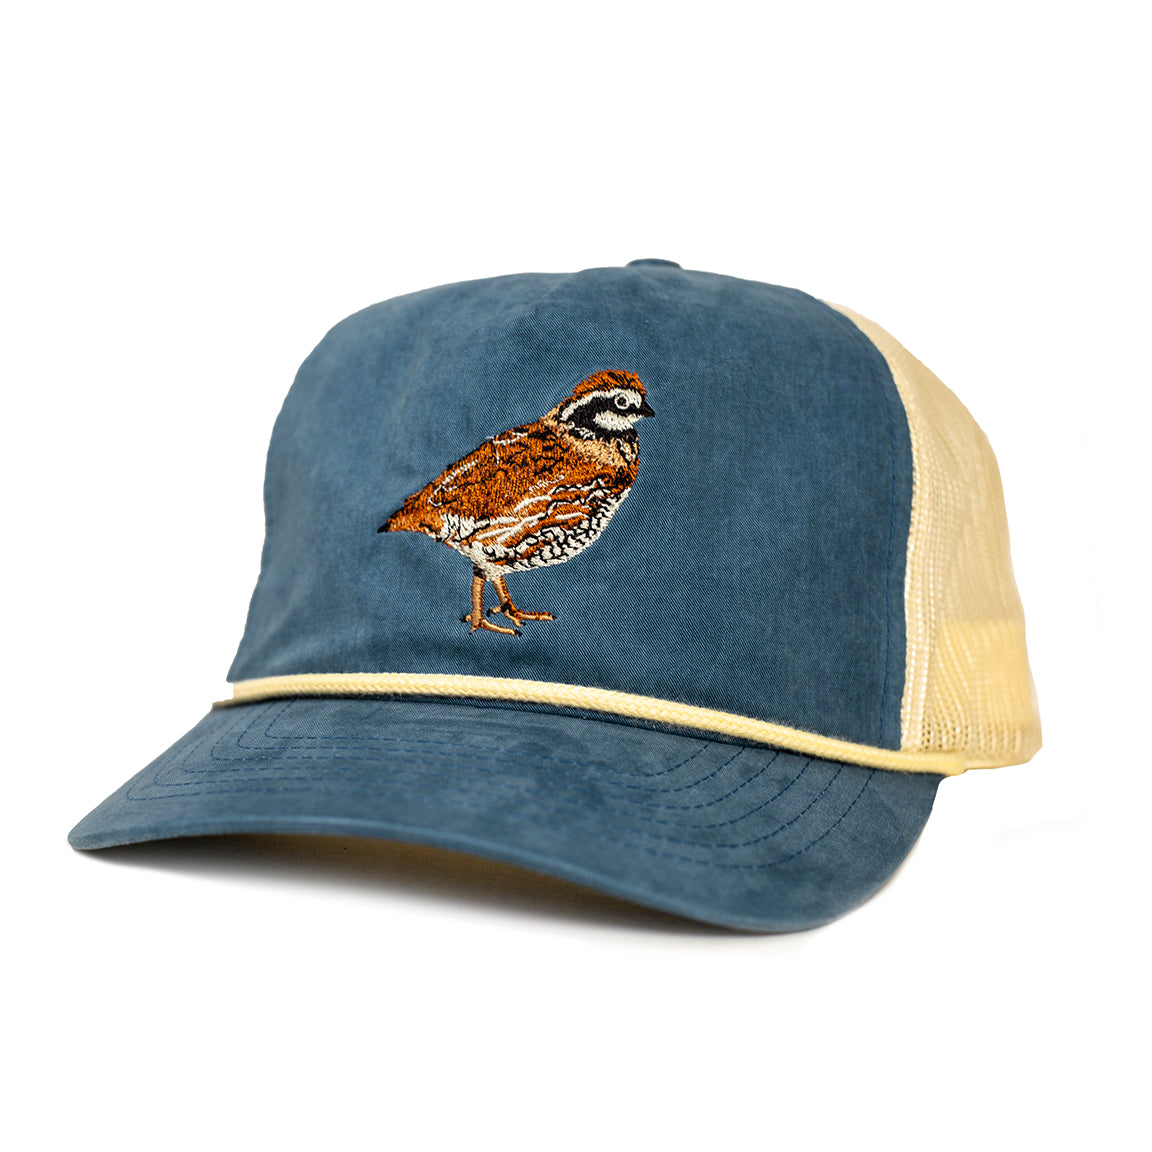 Kevin's Soft Washed Cotton Bachelor Rope Quail Cap-Men's Accessories-Legion Blue/Sand/Cream-ONE SIZE-Kevin's Fine Outdoor Gear & Apparel